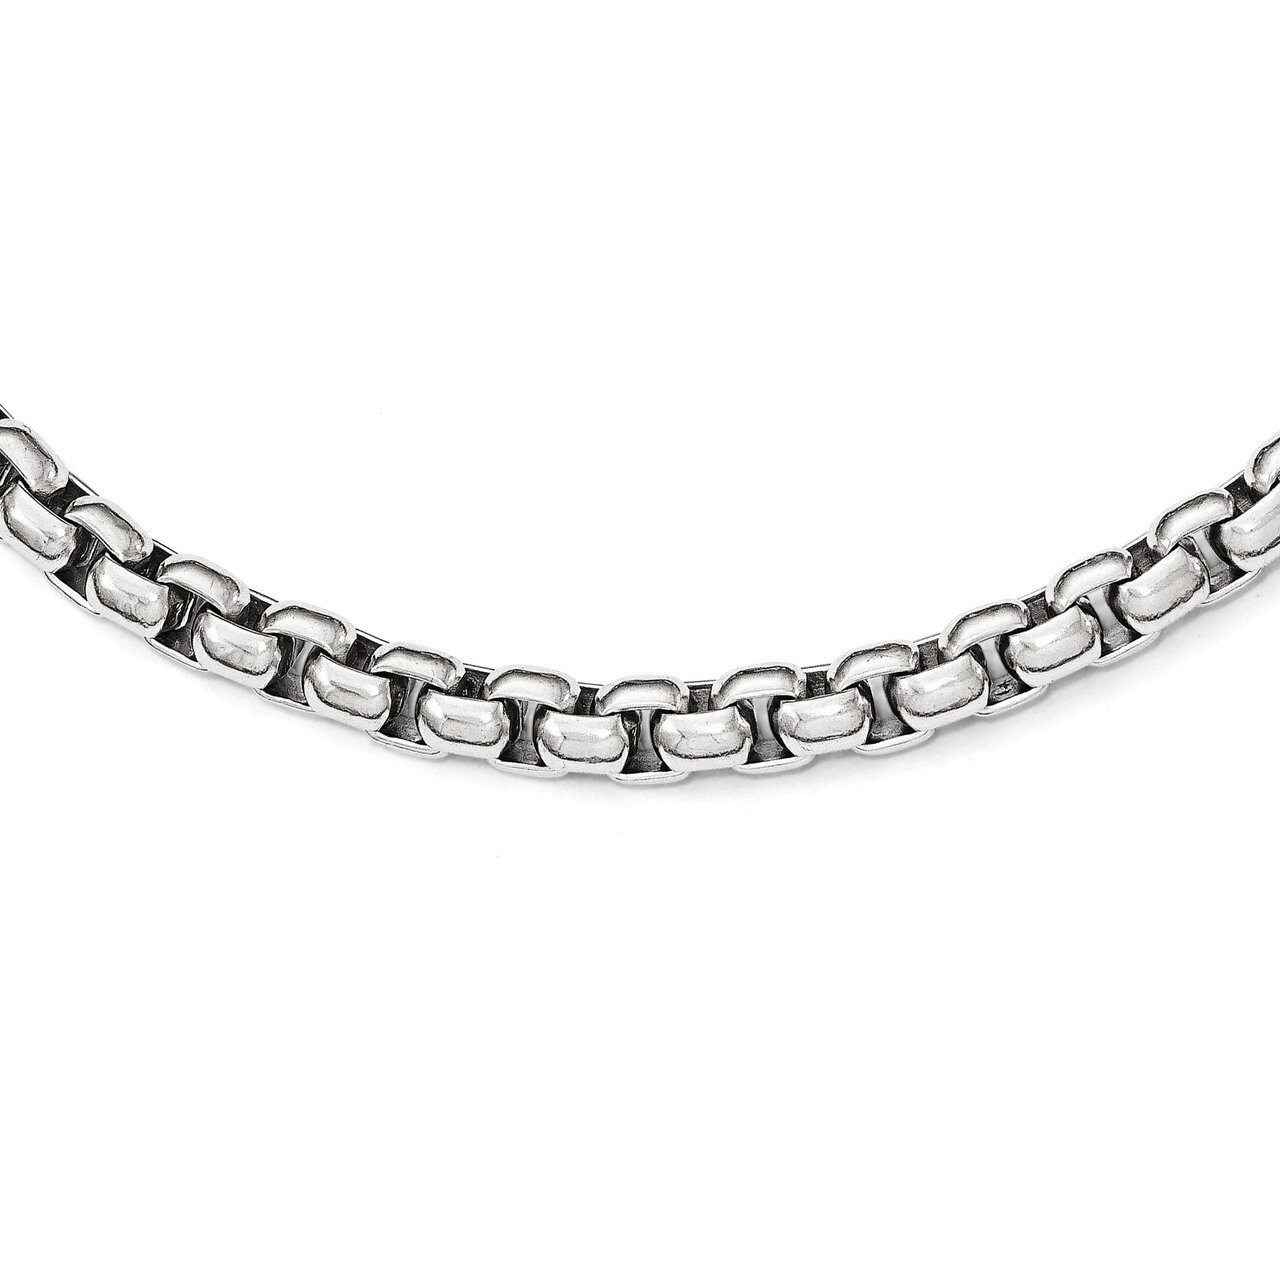 Polished 24 Inch Necklace - Stainless Steel SRN1799-24